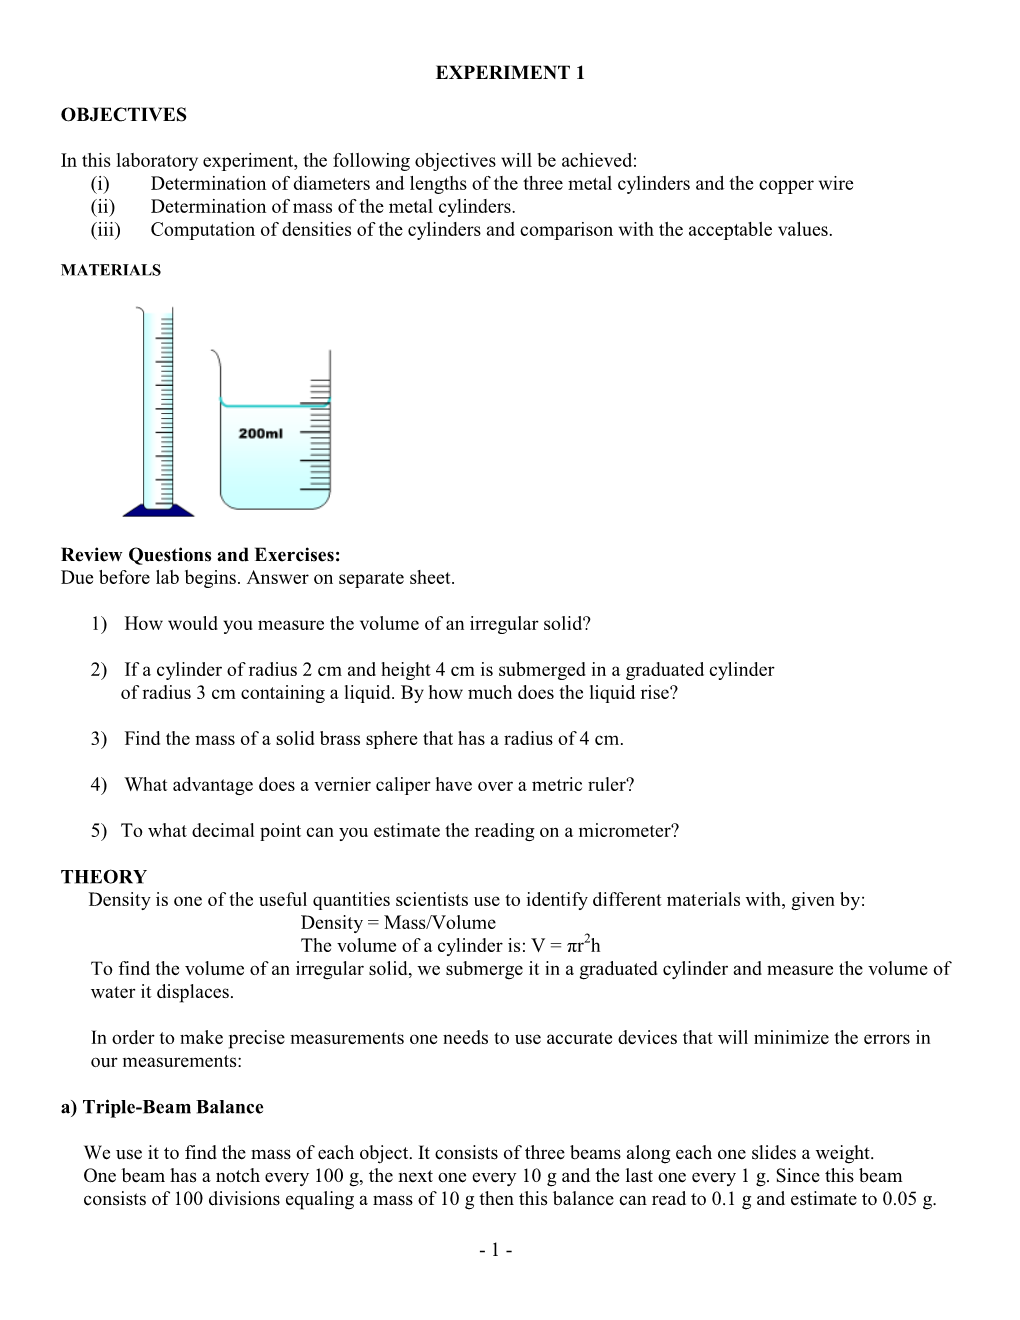 Review Questions and Exercises: Due Before Lab Begins